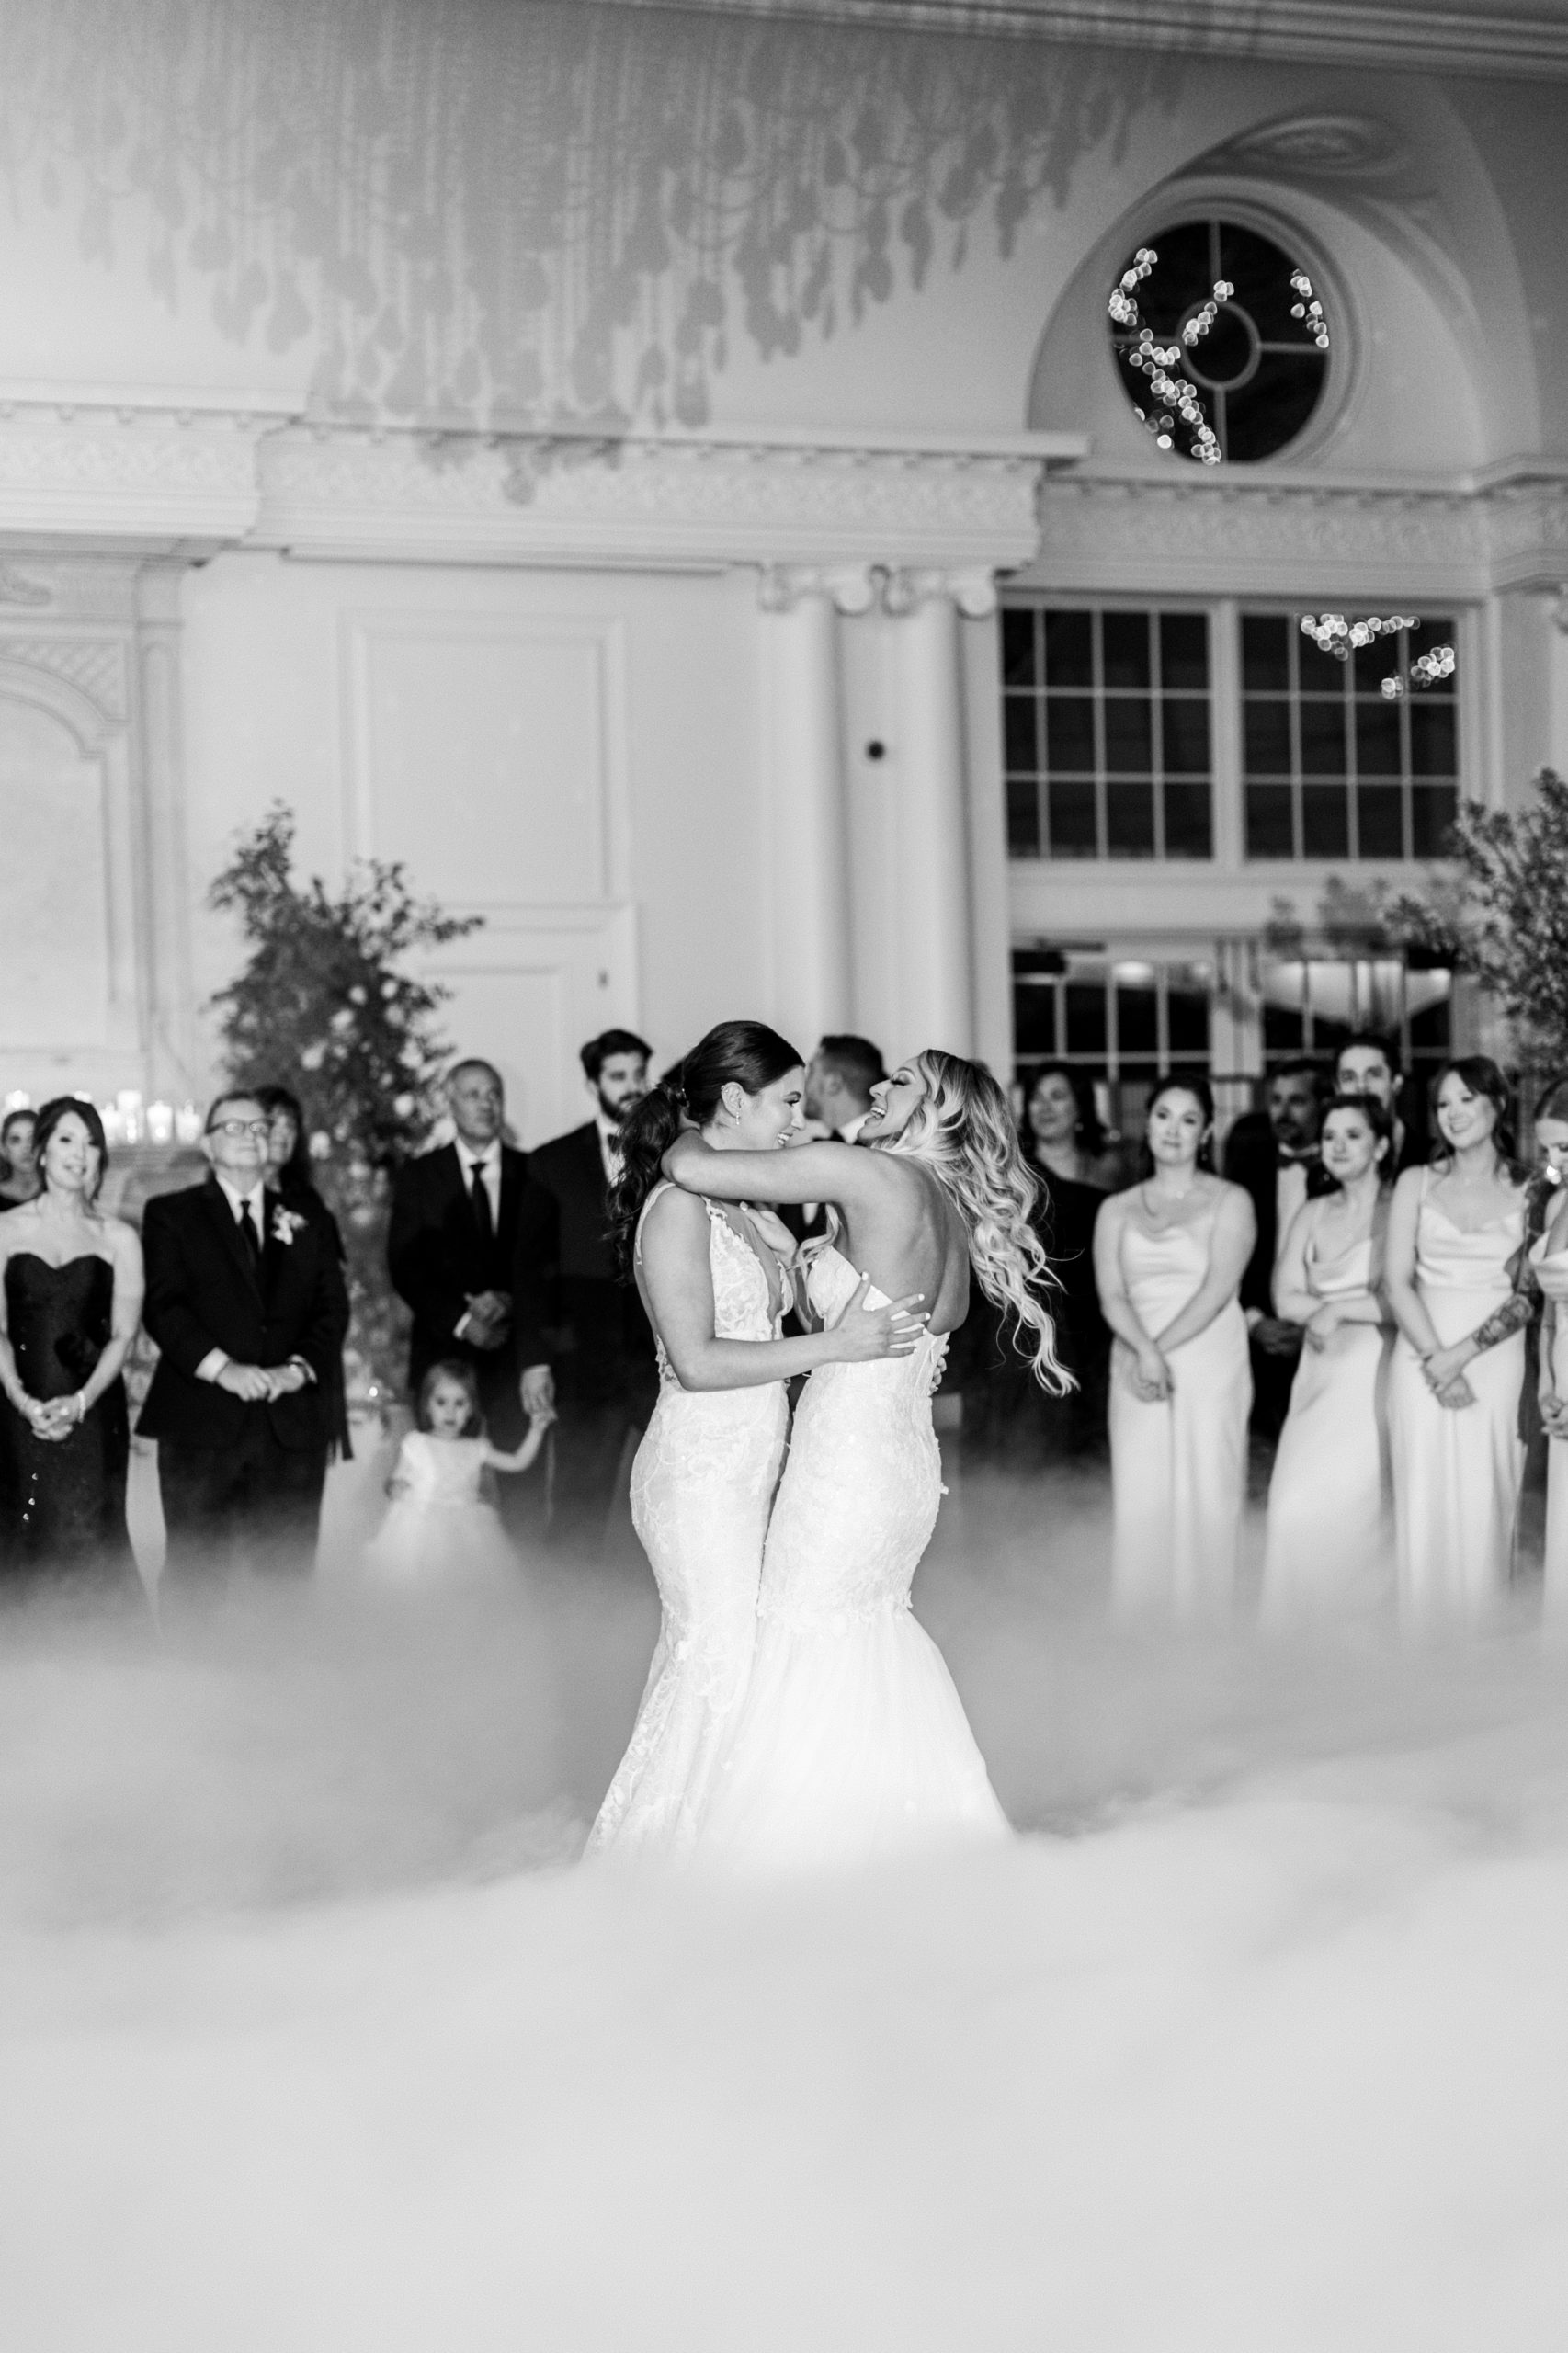 Brides share a dance and smile at wedding reception for a Romantic Park Chateau Wedding Photography